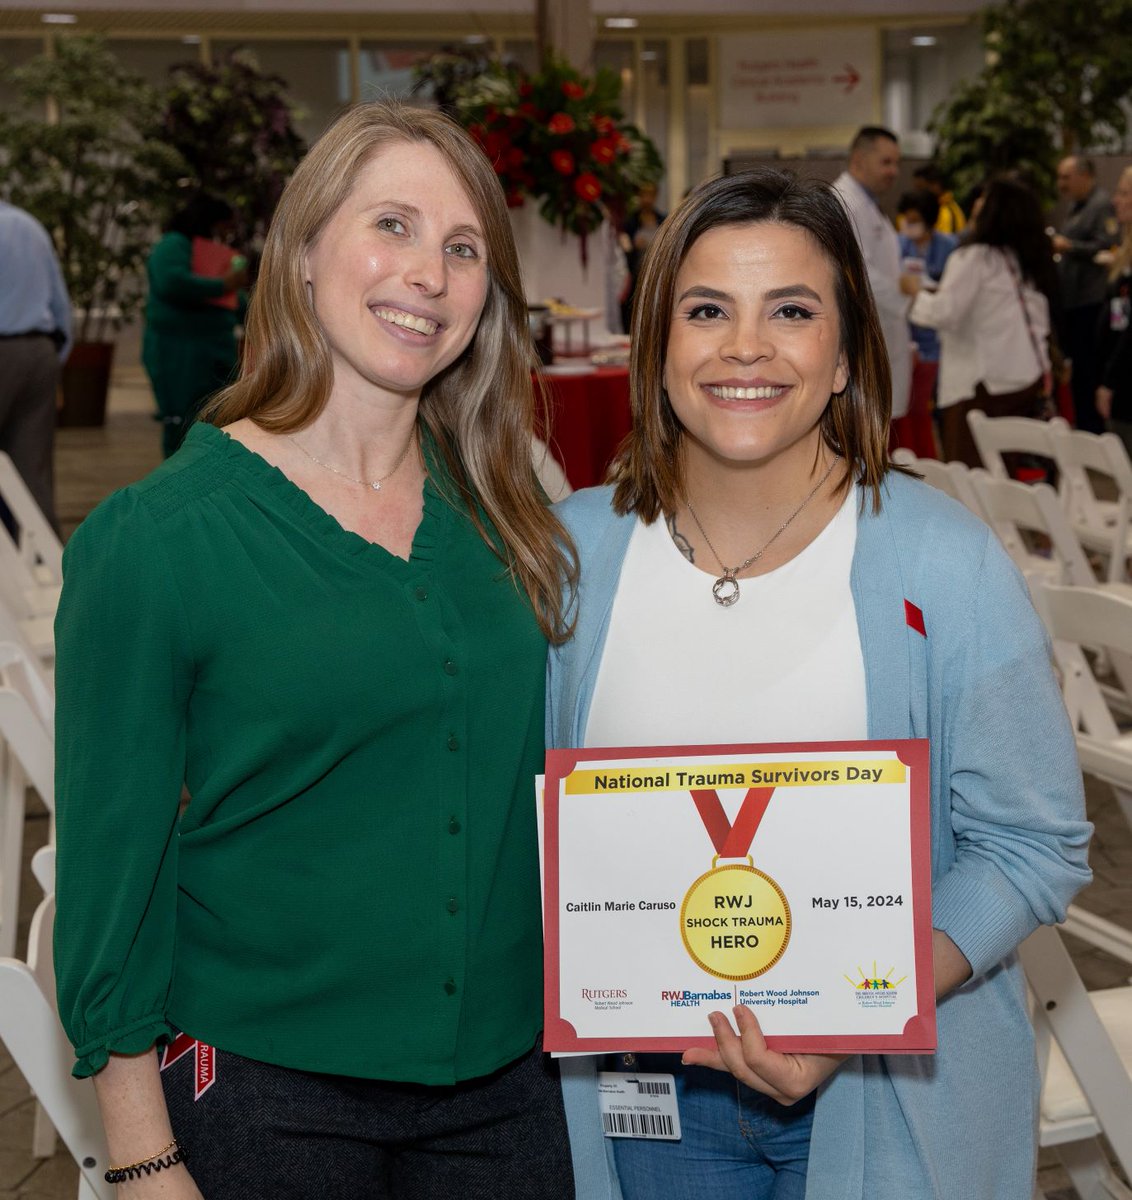 We were honored to host a Trauma Survivors Reunion, celebrating the resilience and strength of individuals who have overcome significant challenges. This special event paid tribute to two recent RWJUH patients, Brianna and Javier. @SurgEdMD @RWJMS